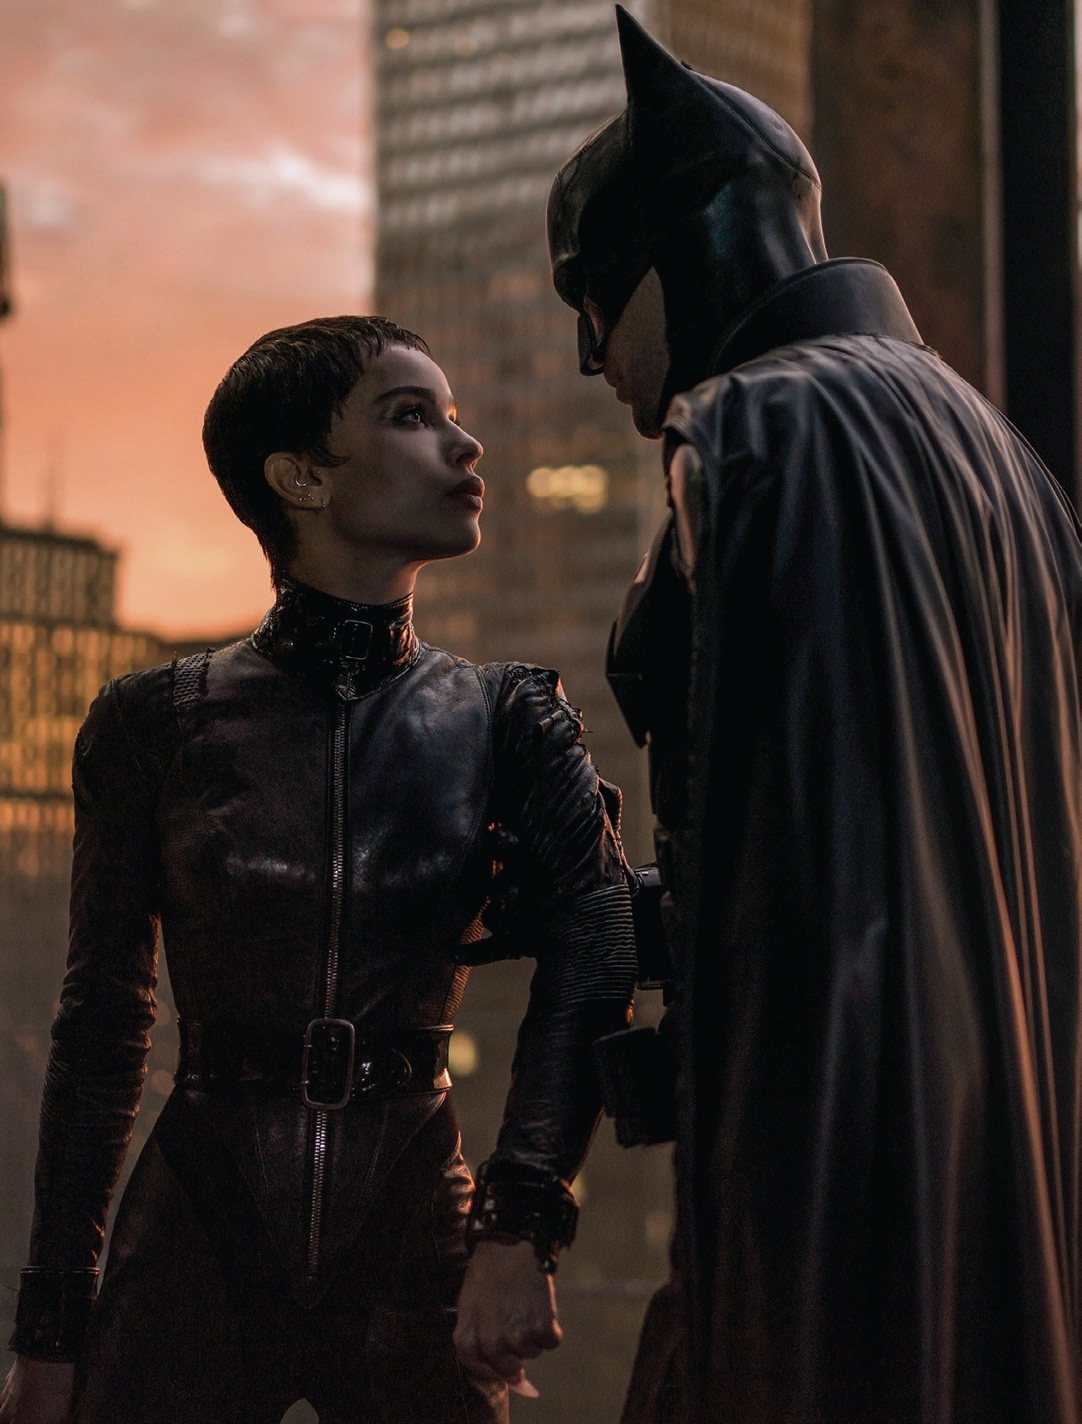 Zoë Kravitz as Selina Kyle and Robert Pattinson as Batman in Warner Bros. Pictures’ action adventure The Batman PHOTO: BY JONATHAN OLLEY/™ & © DC COMICS. © 2021 WARNER BROS. ENTERTAINMENT INC. ALL RIGHTS RESERVED